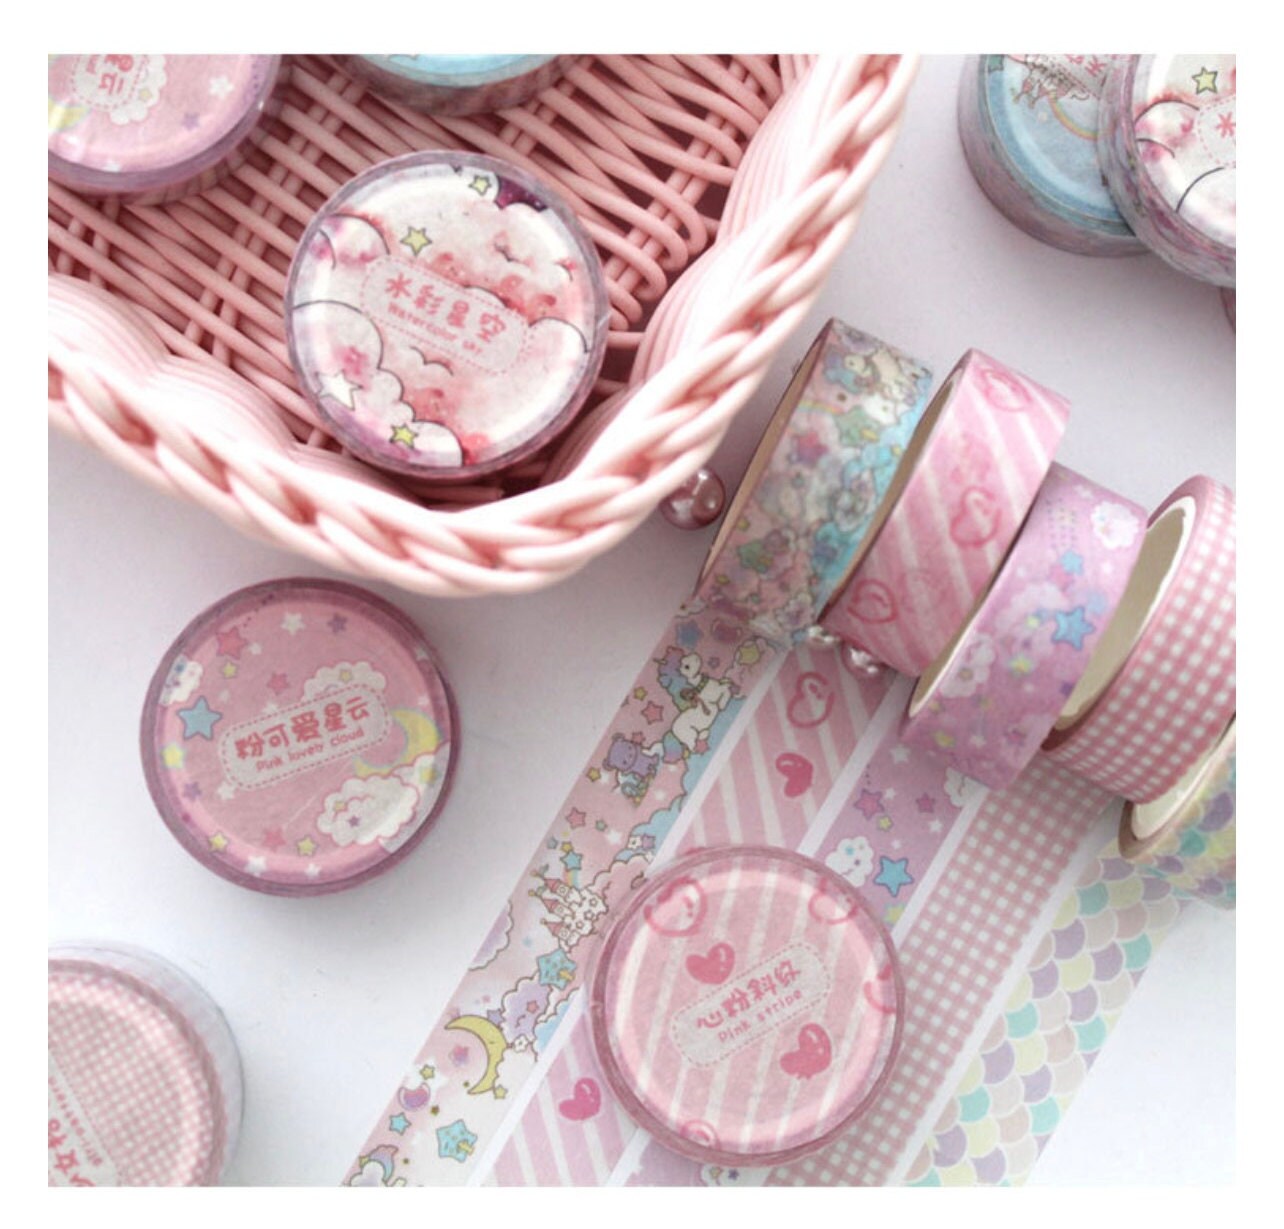 Cute Washi Tapes, Winter Washi Tape, Planner Washi Tape, Journaling Washi  Tape, Cute Cat Washi Tape, Holiday Washi Tape 